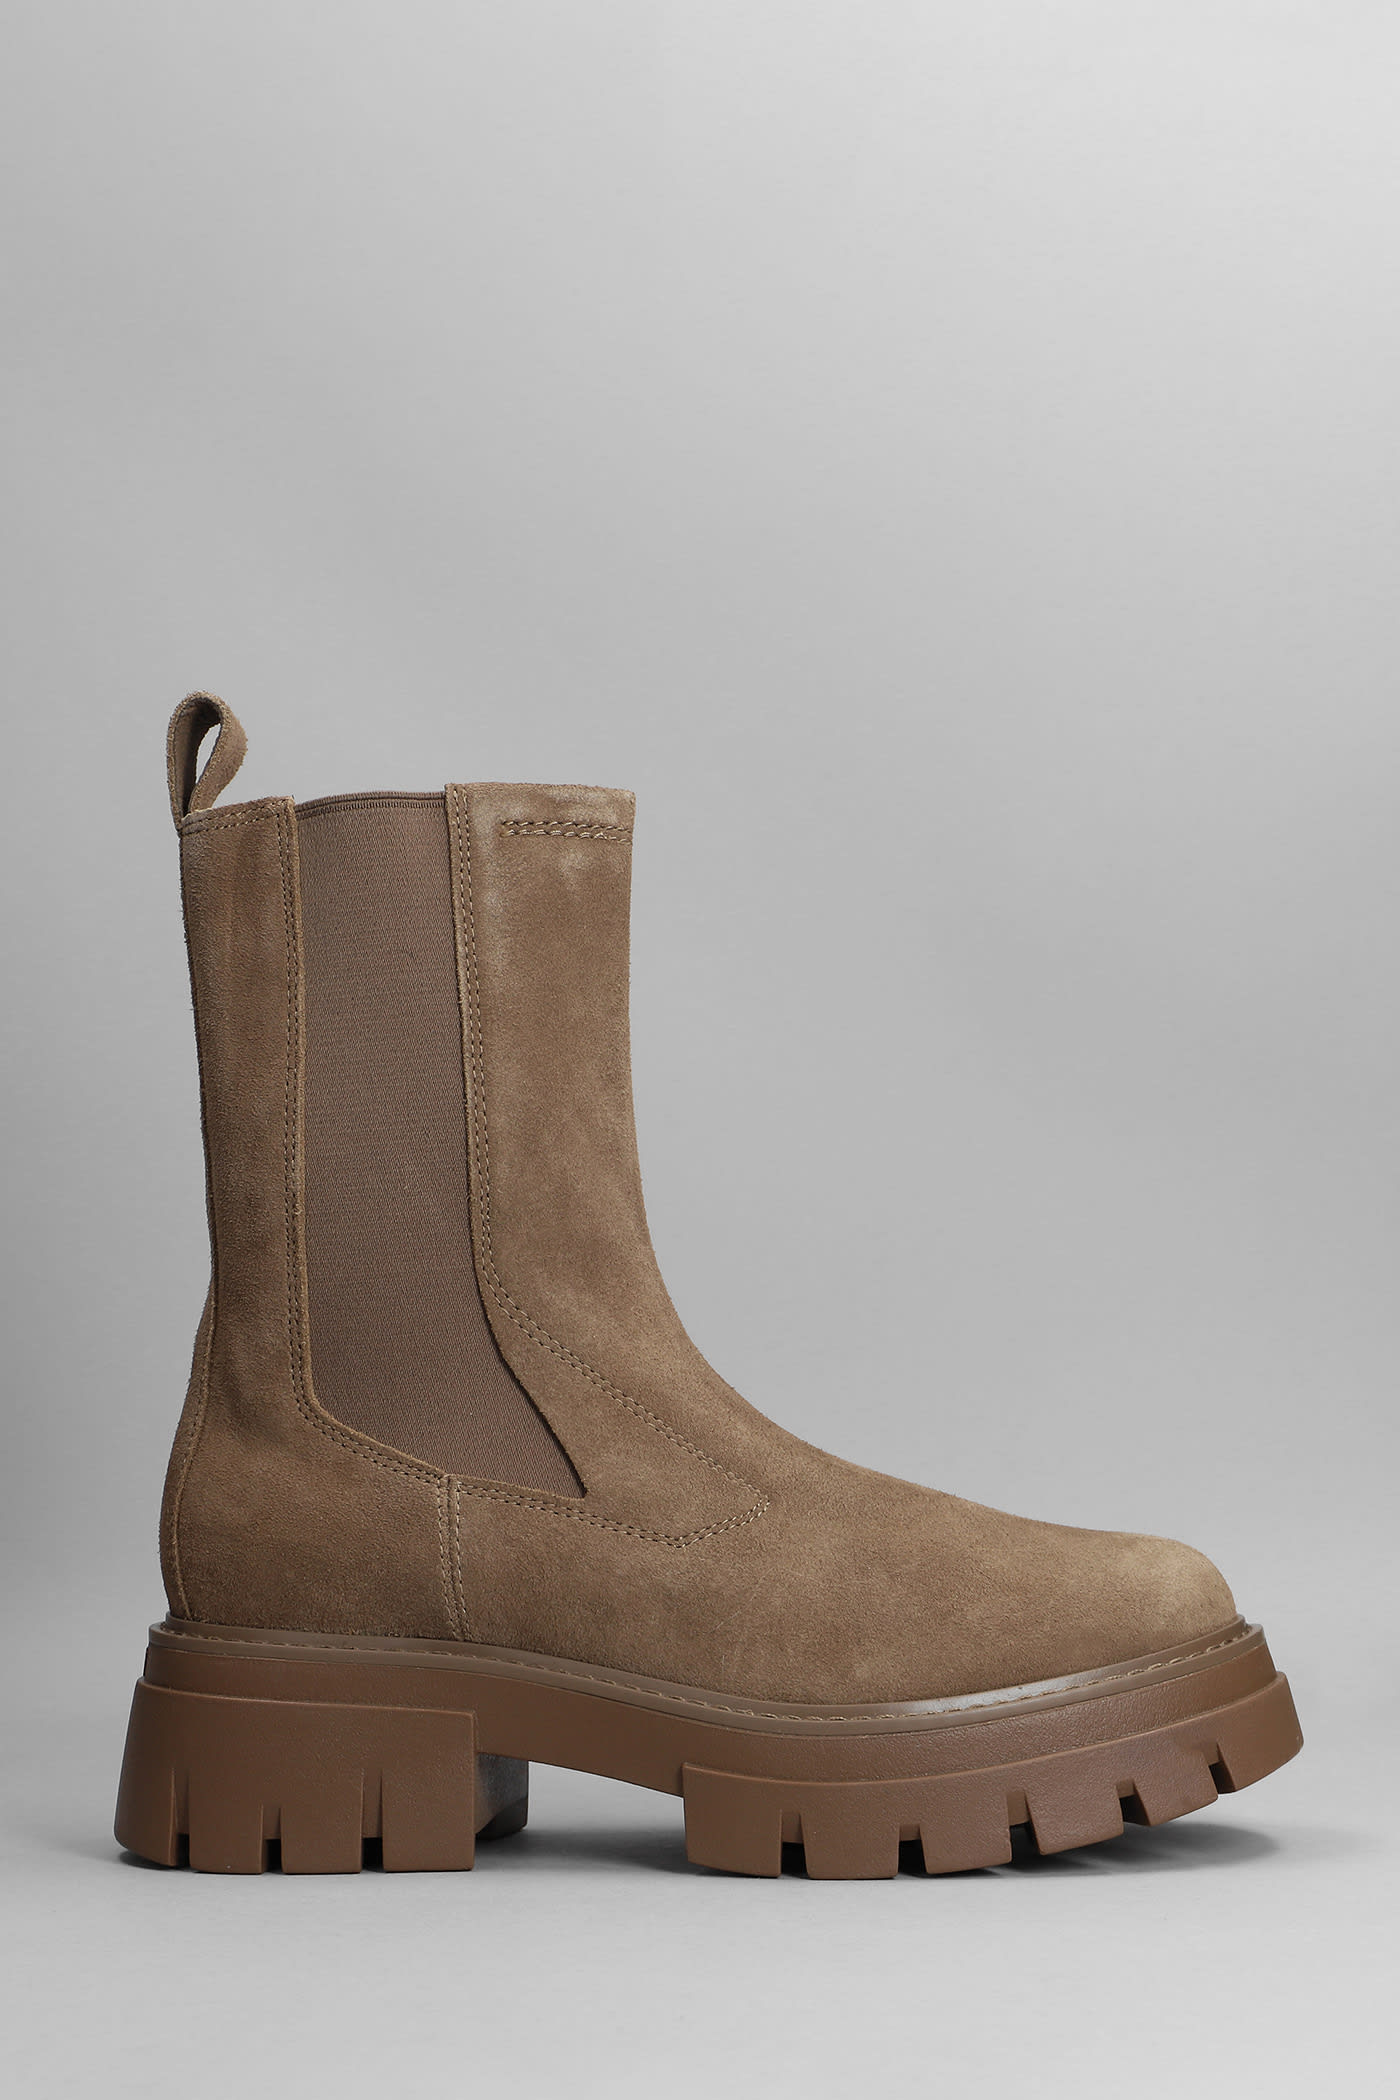 Ash Loud Combat Boots In Taupe Suede